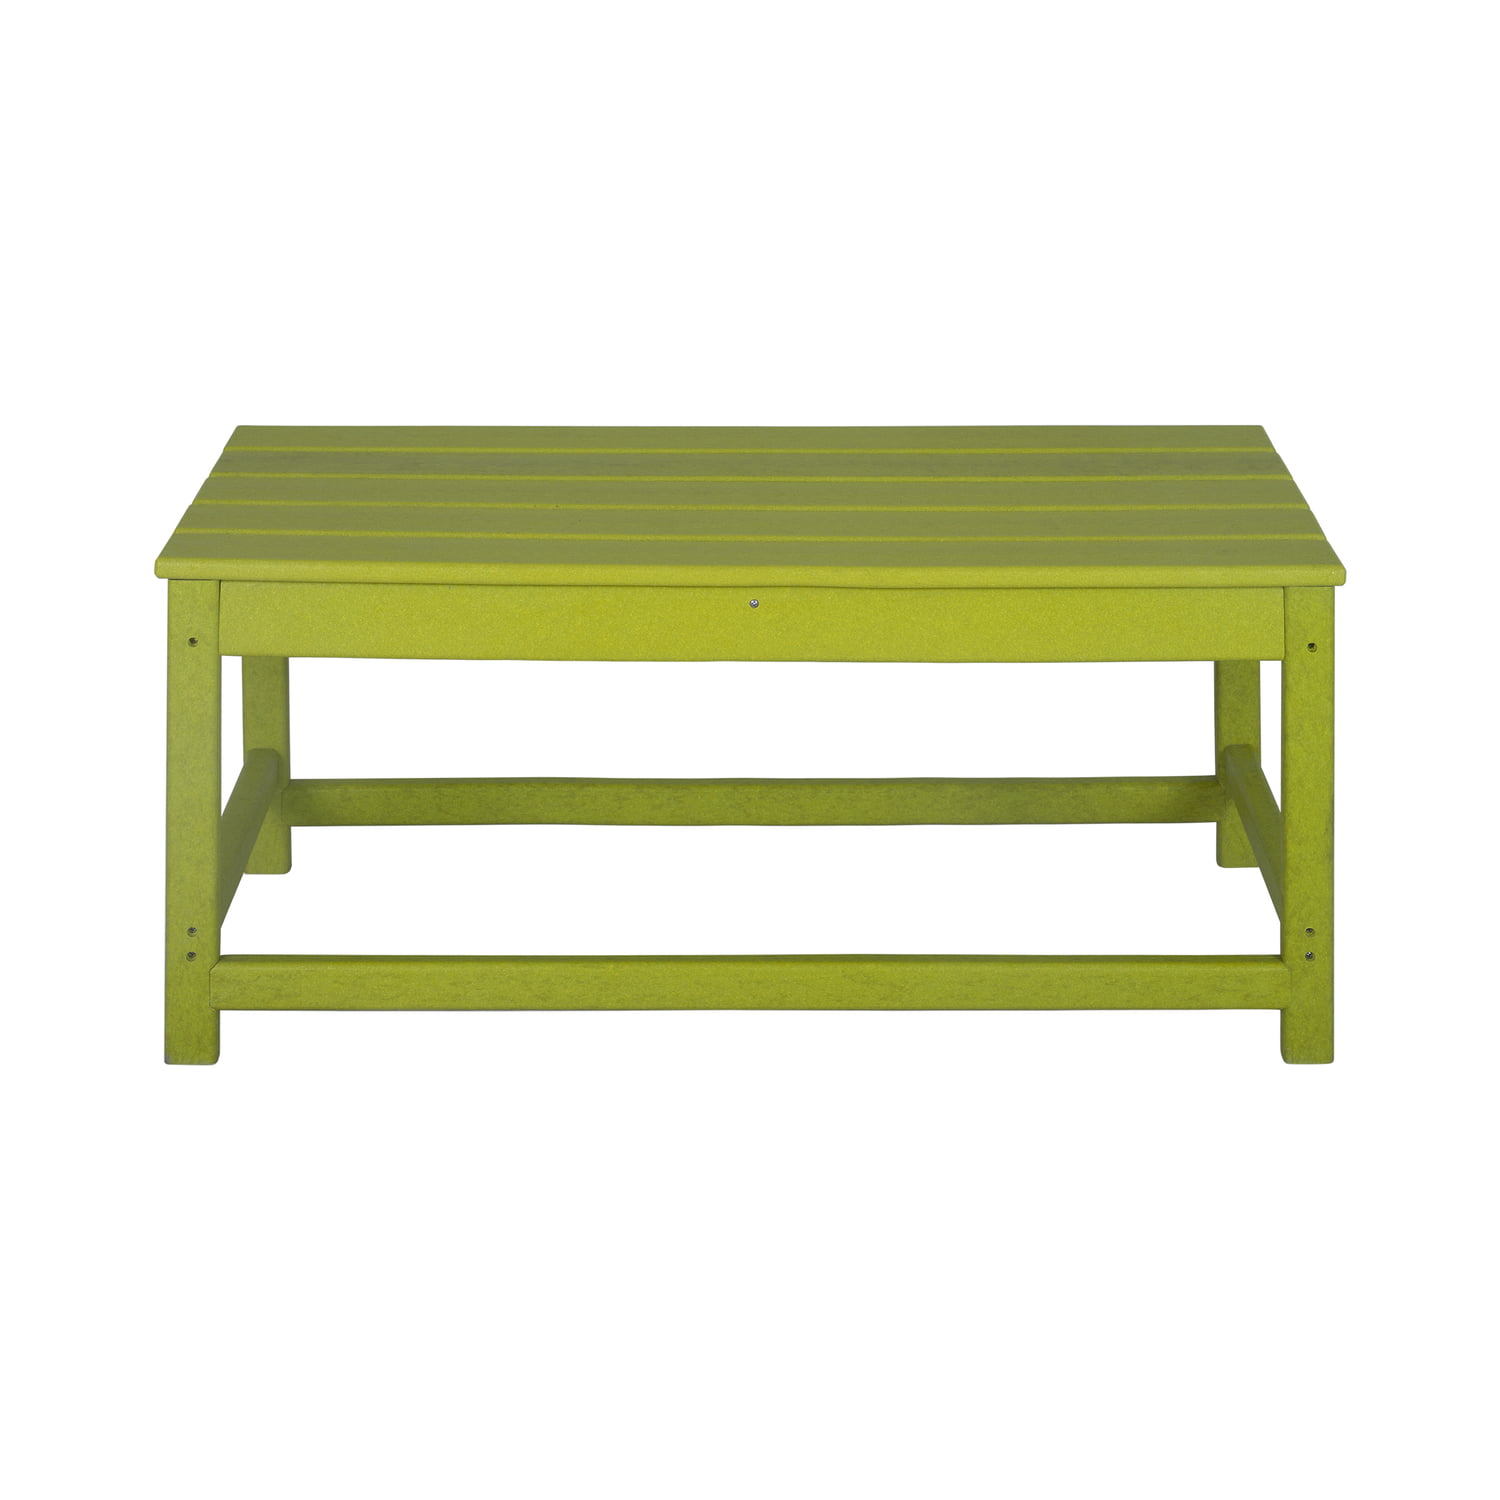 WO Outdoor Patio Classic Adirondack Coffee Table, Lime